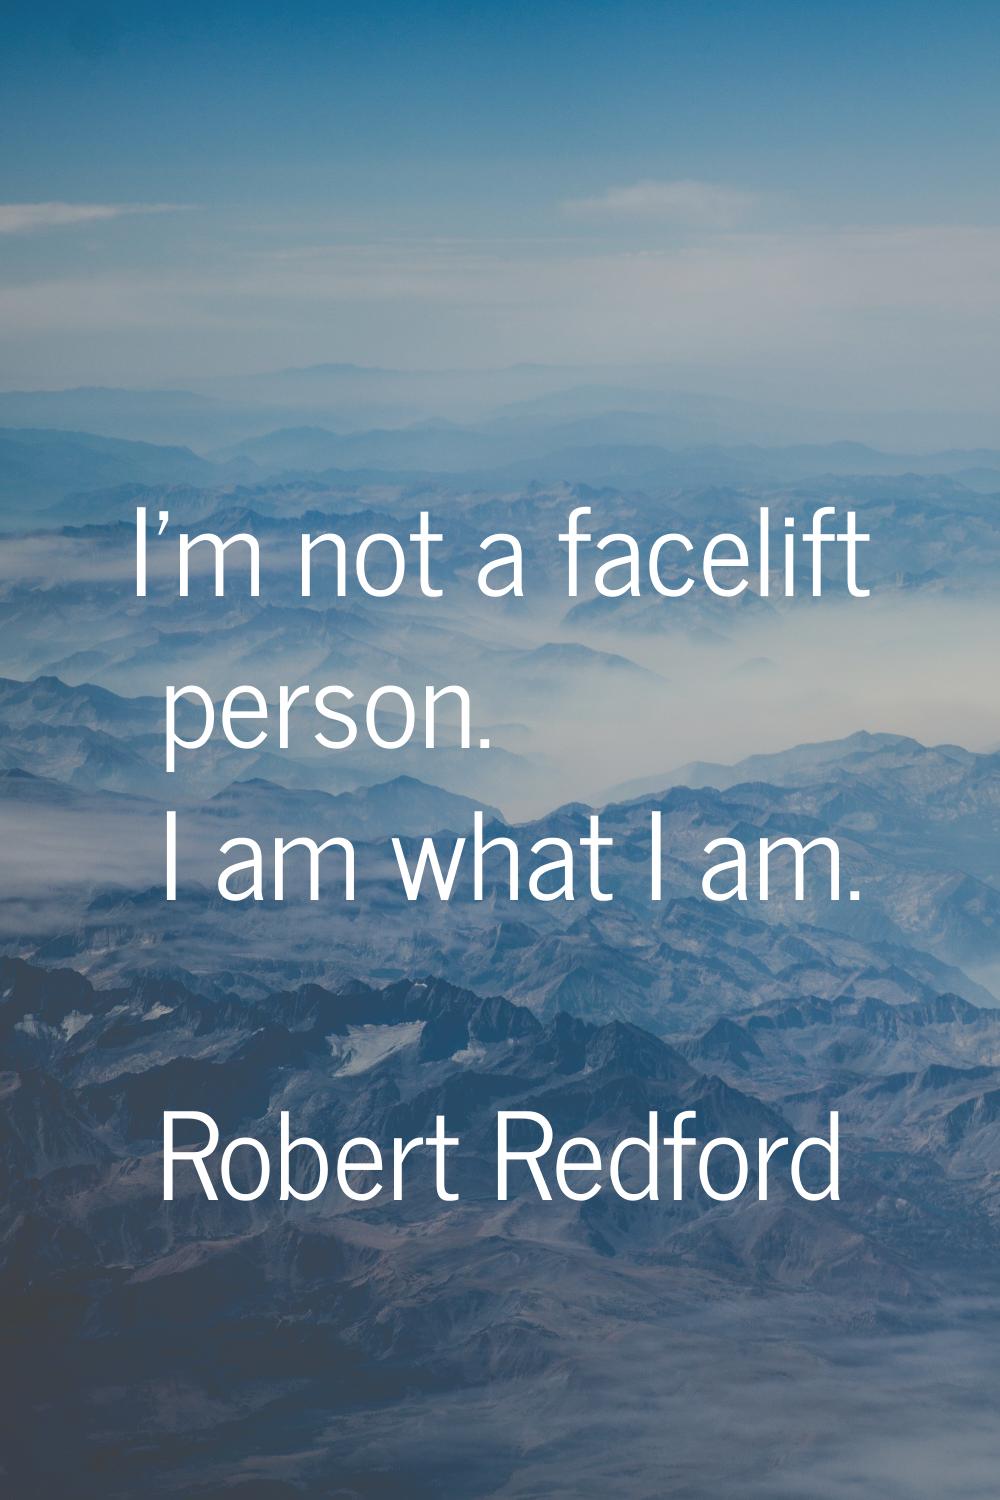 I'm not a facelift person. I am what I am.